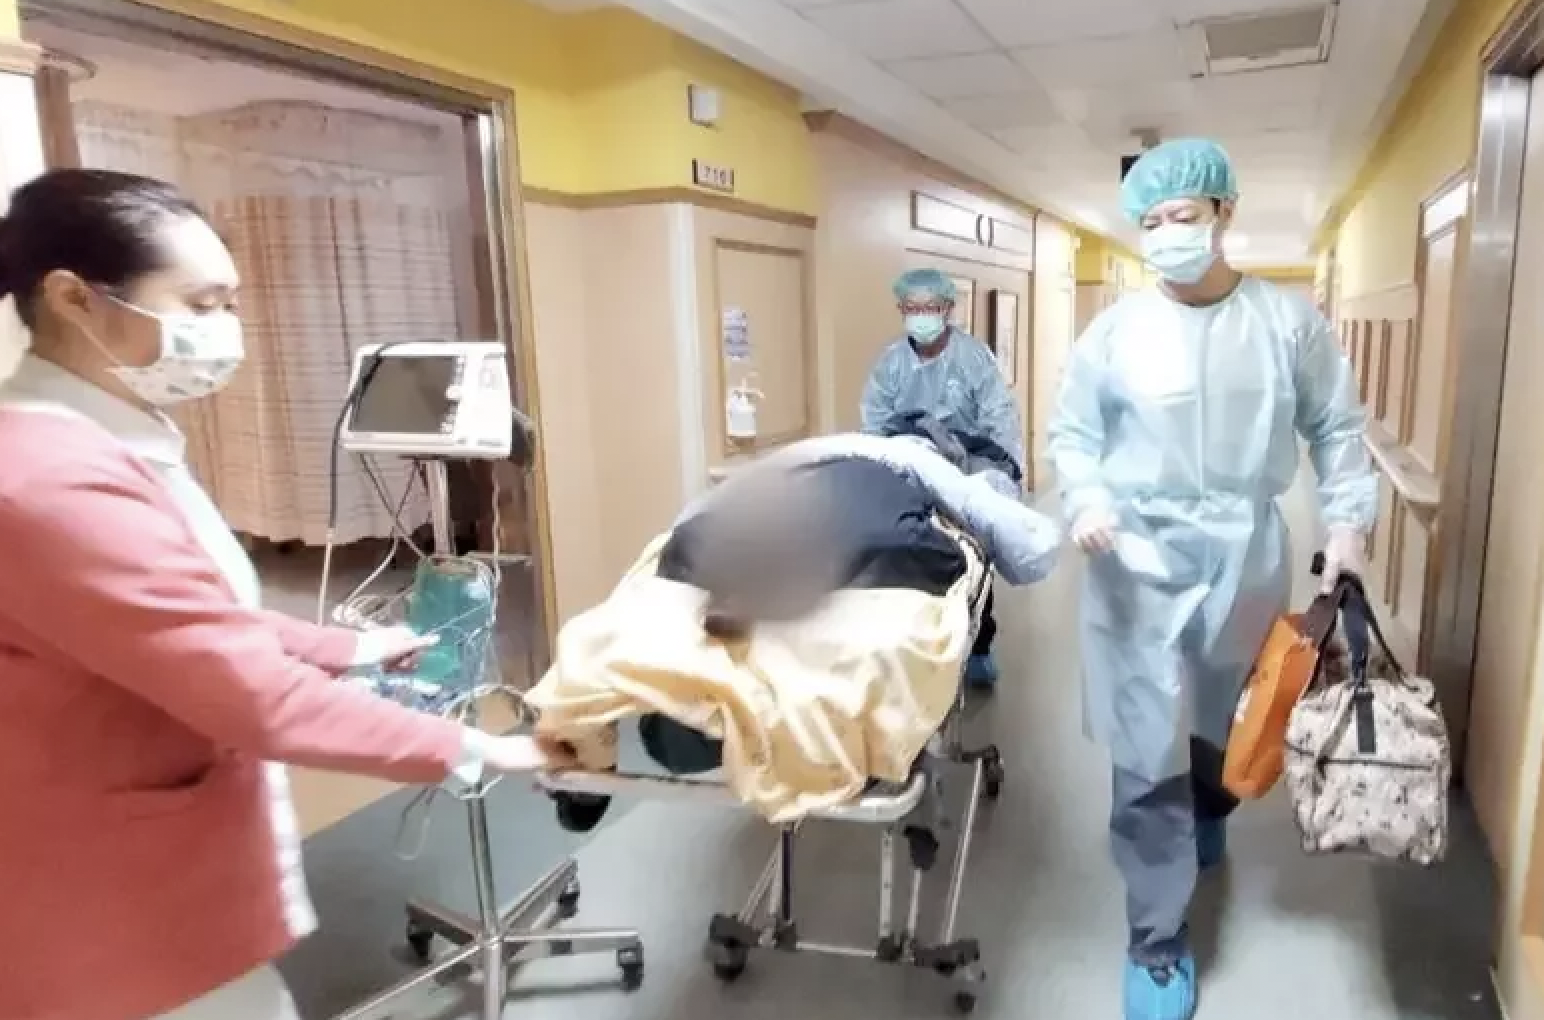 A 43-year-old Thai migrant worker in Taoyuan was recently hospitalized after suffering a stroke health authorities & NGOs came together to help her return home and reunite with her family. (Photo / Provided by the TEN-CHEN MEDICAL GROUP)